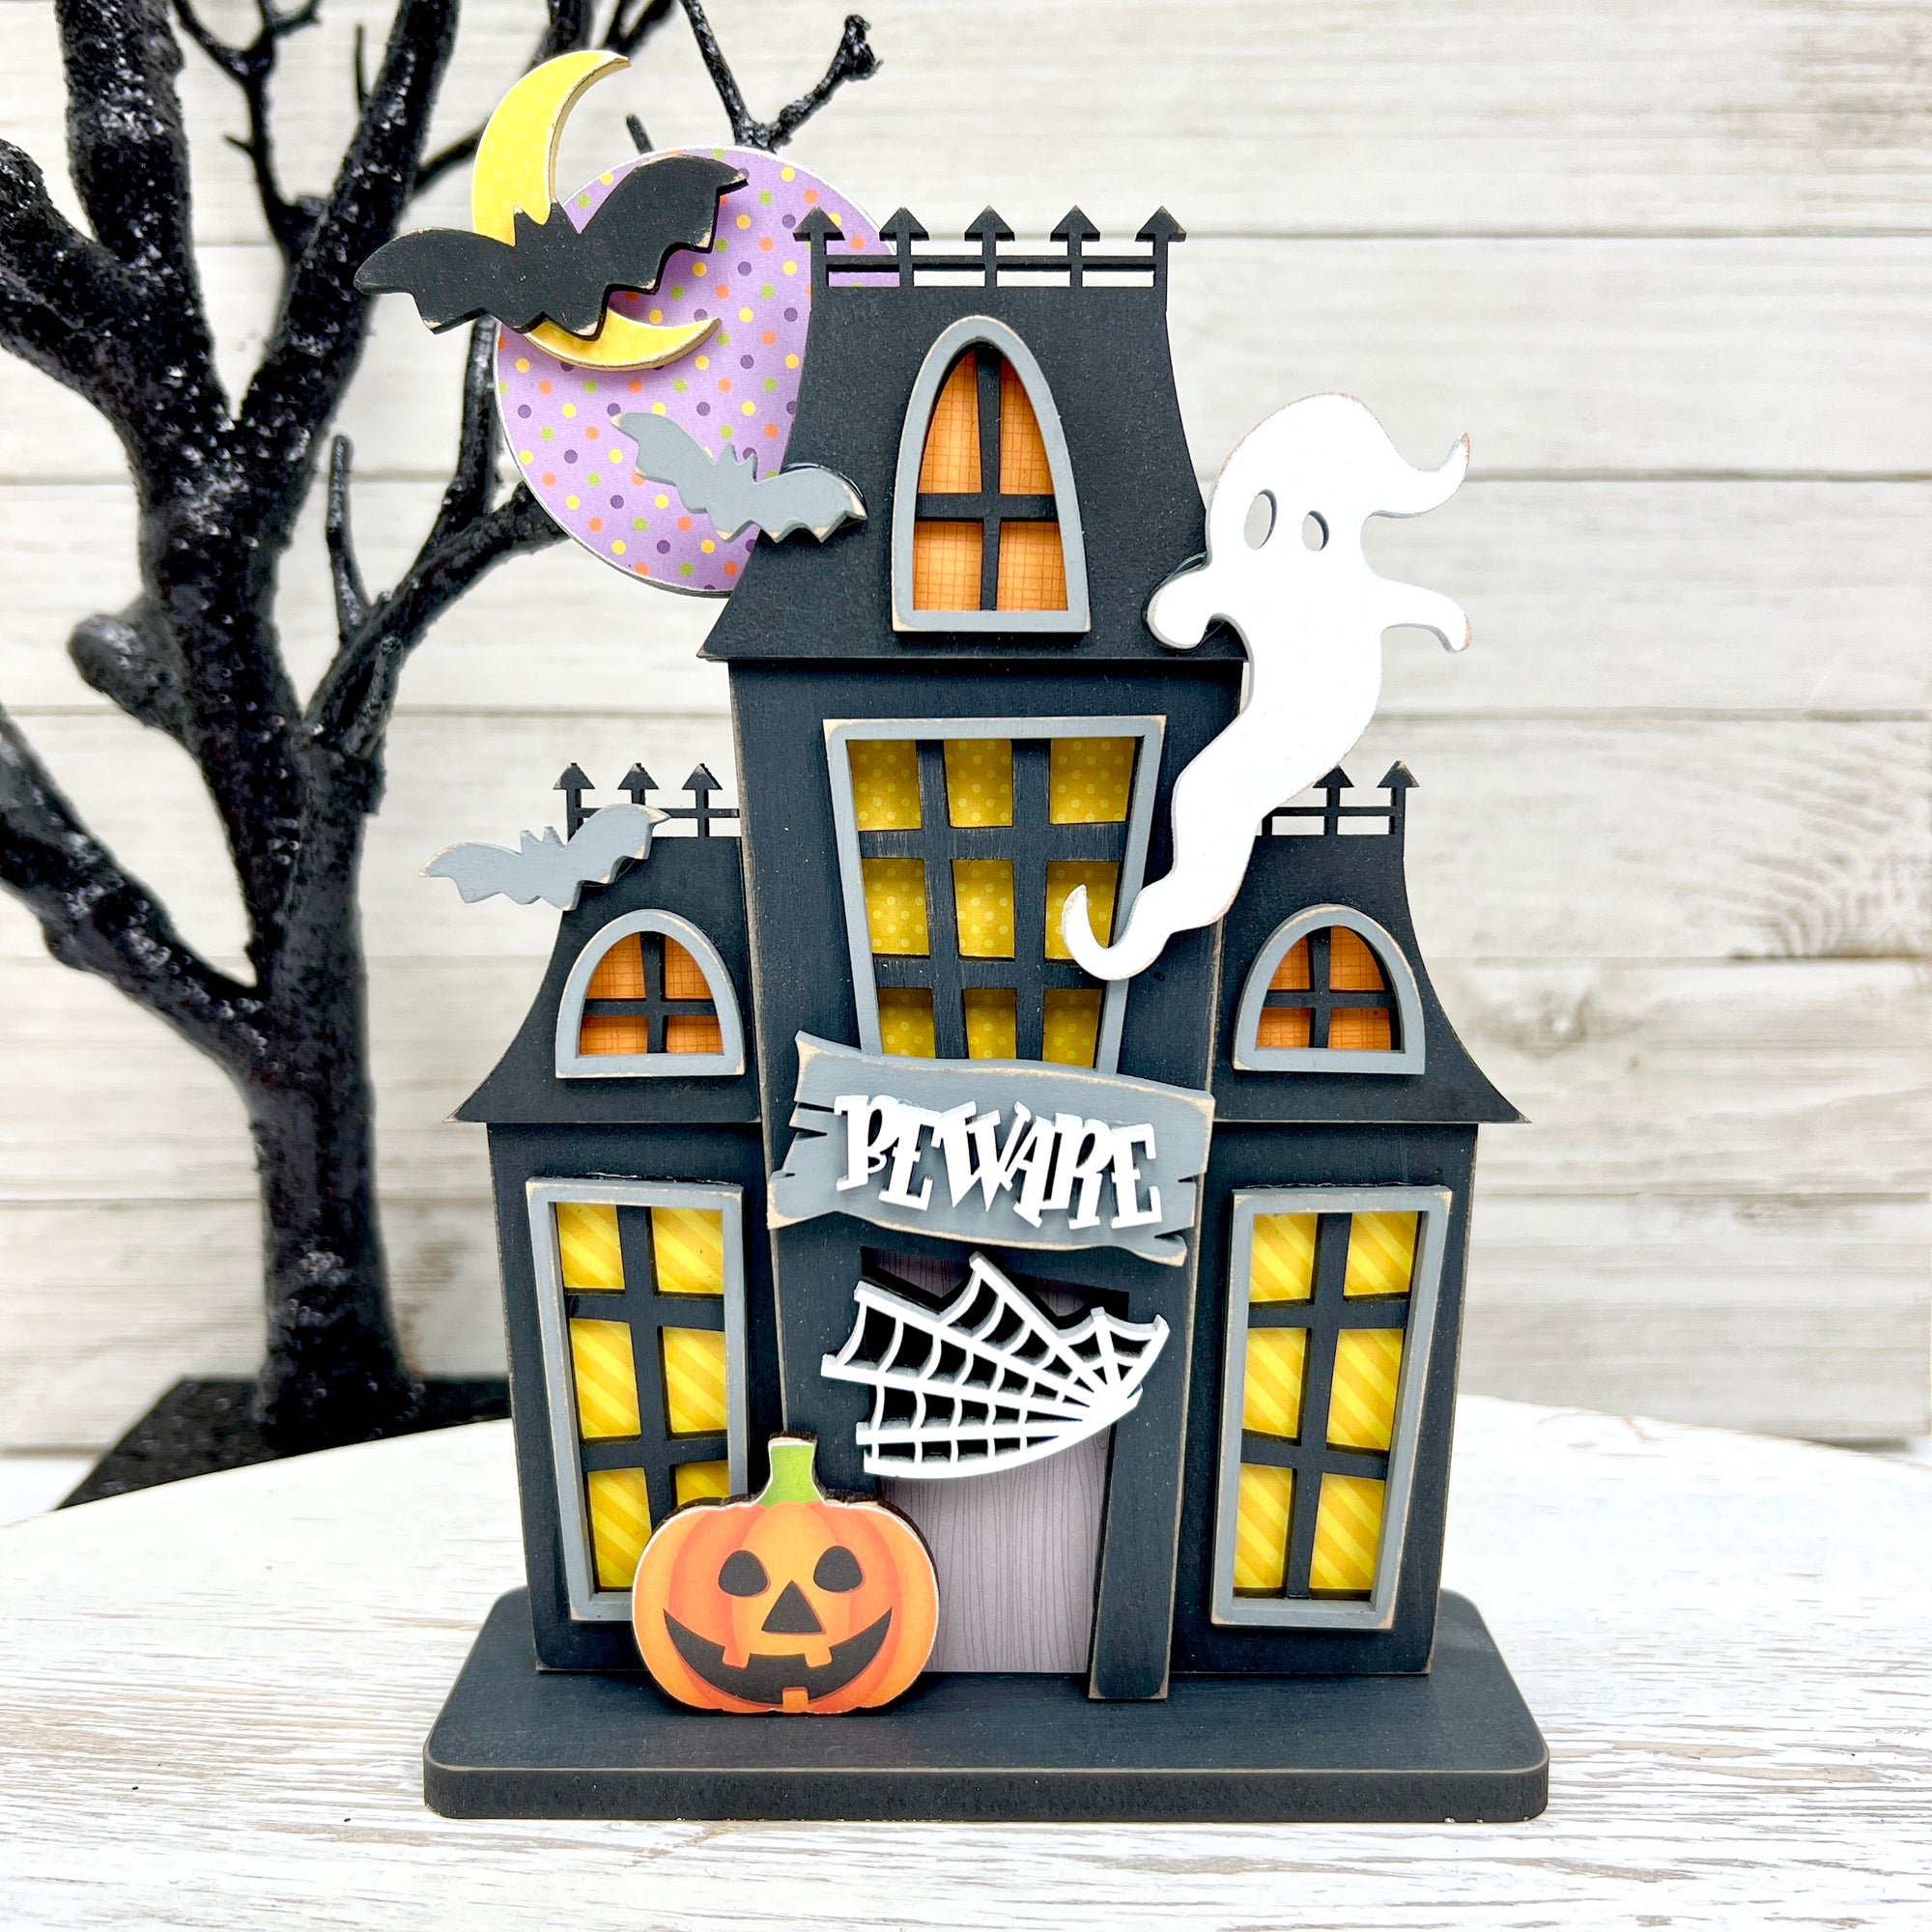 Beware haunted house wood decoration for halloween decorating shelves, mantels, and tiered trays